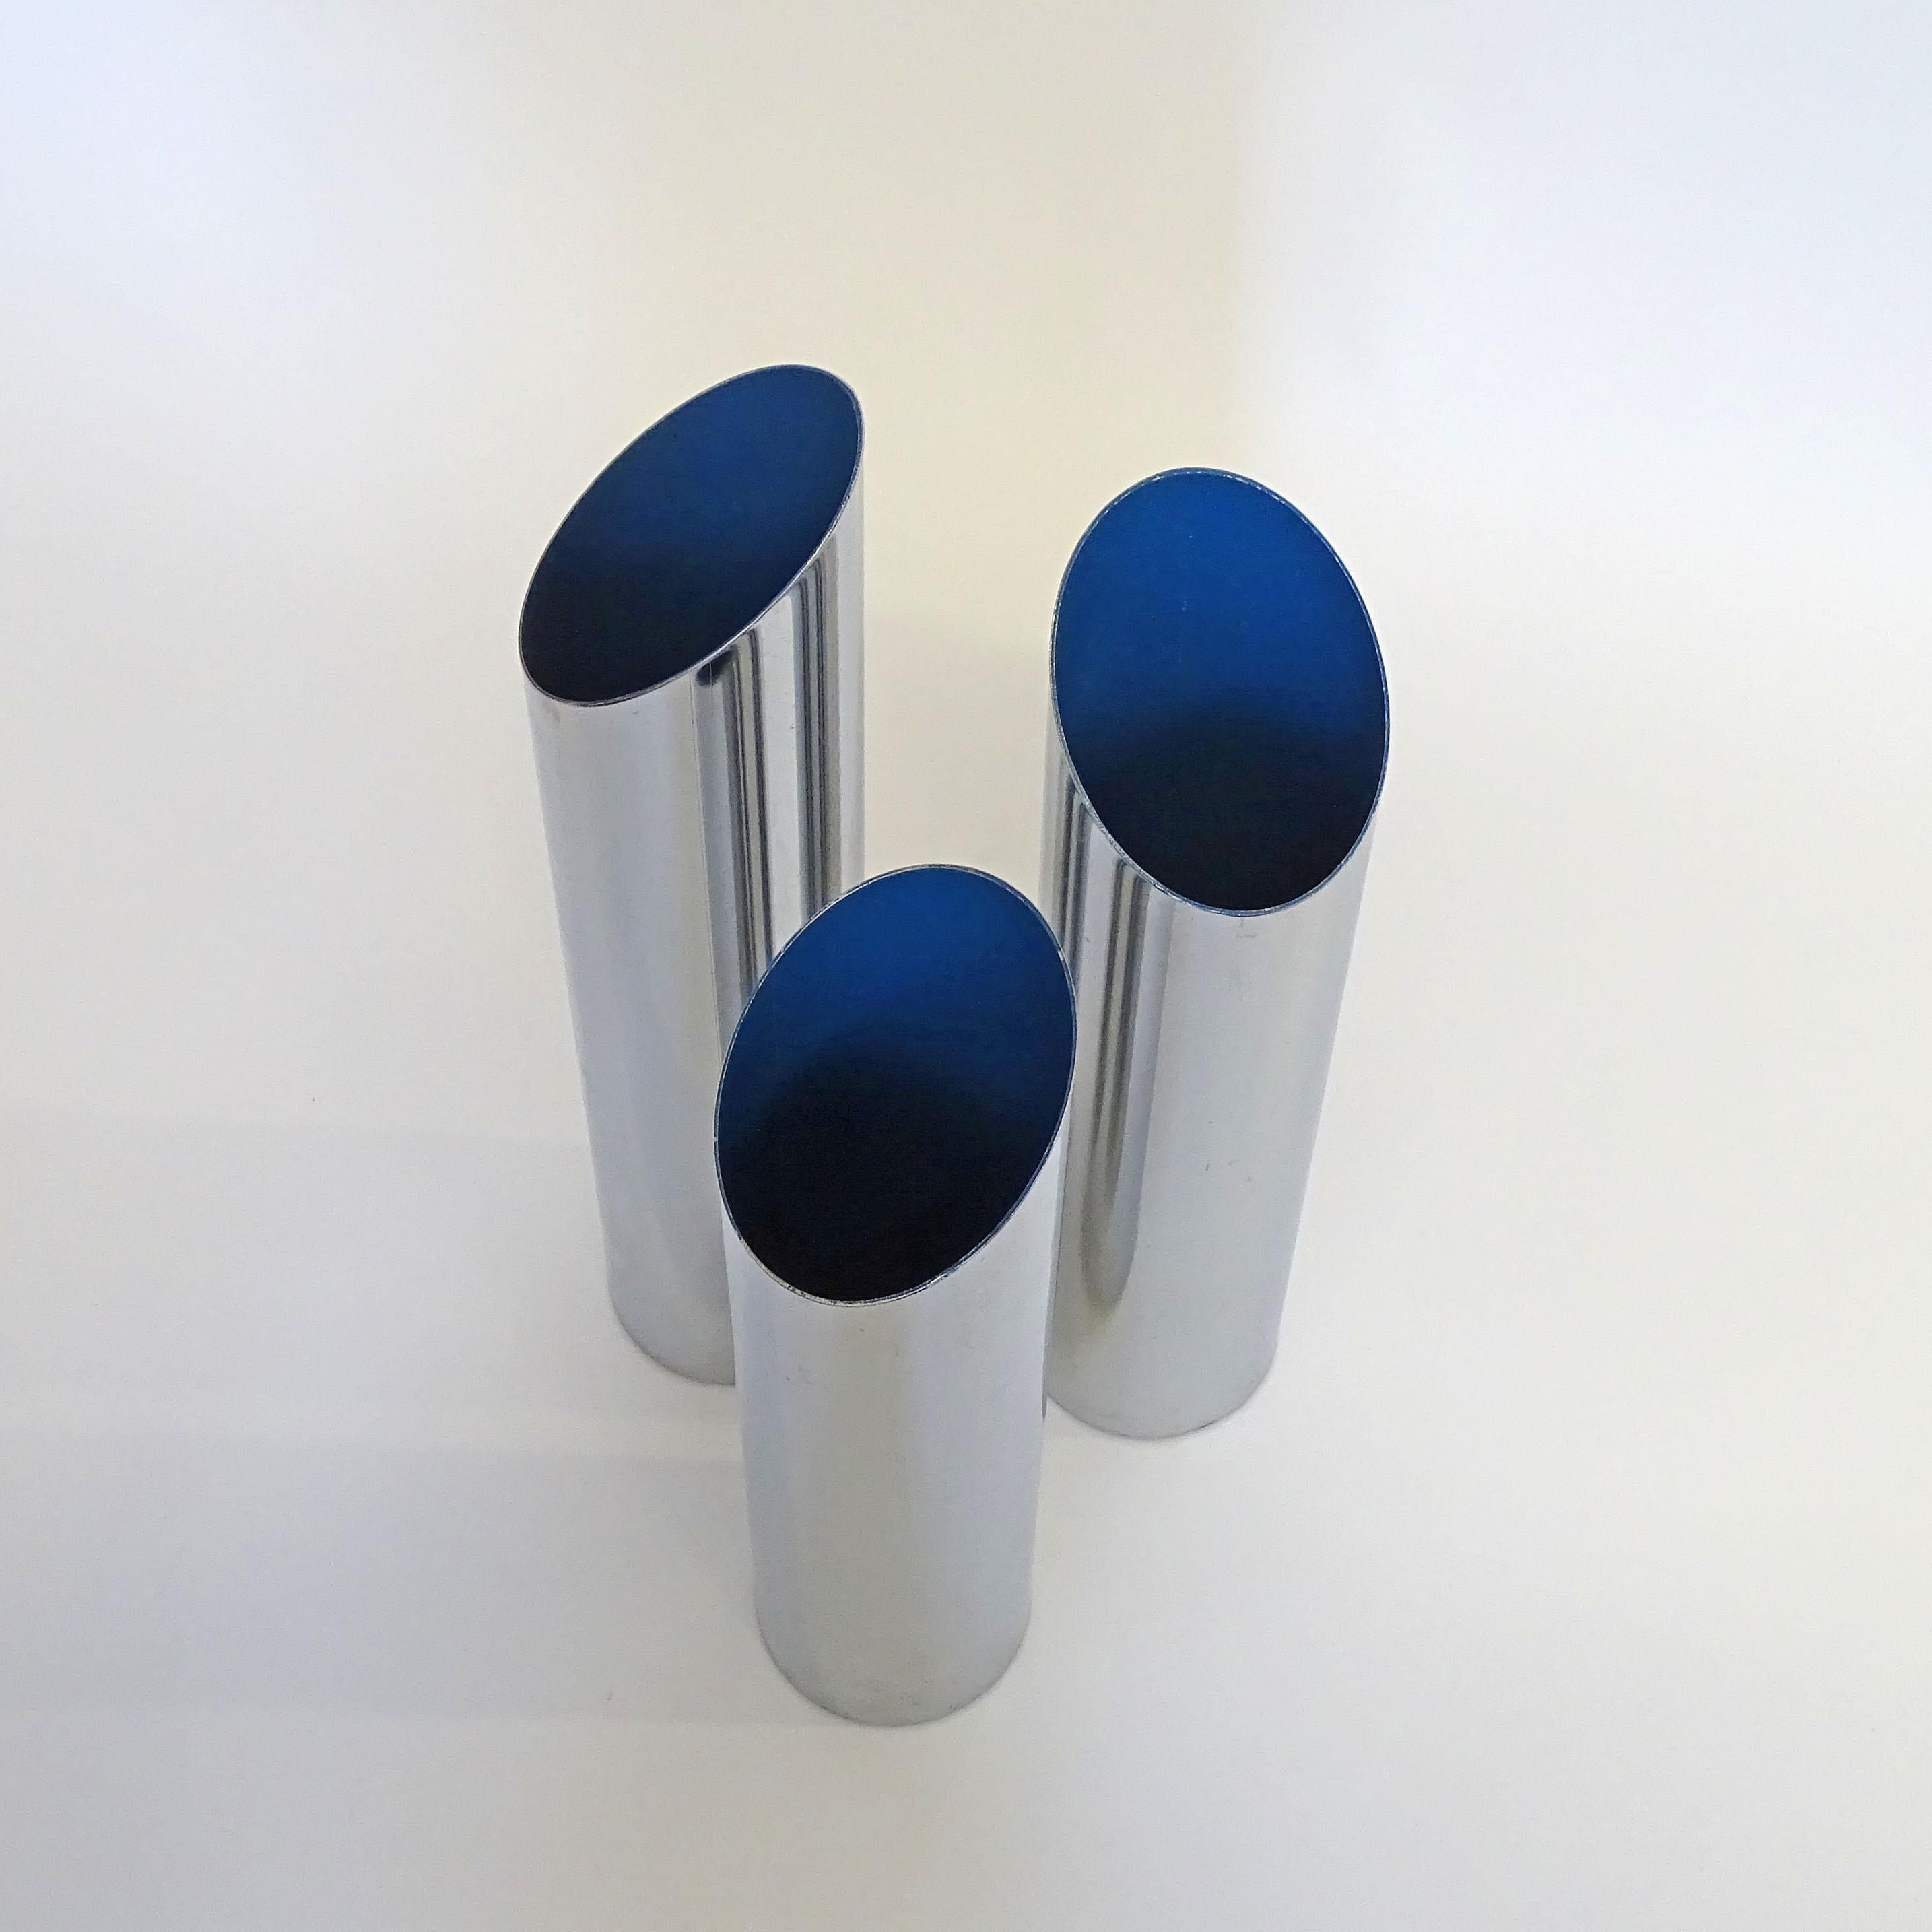 Italian 1950s Three diagonally cut umbrella stand in Chrome and Electric Blue In Good Condition For Sale In Milan, IT